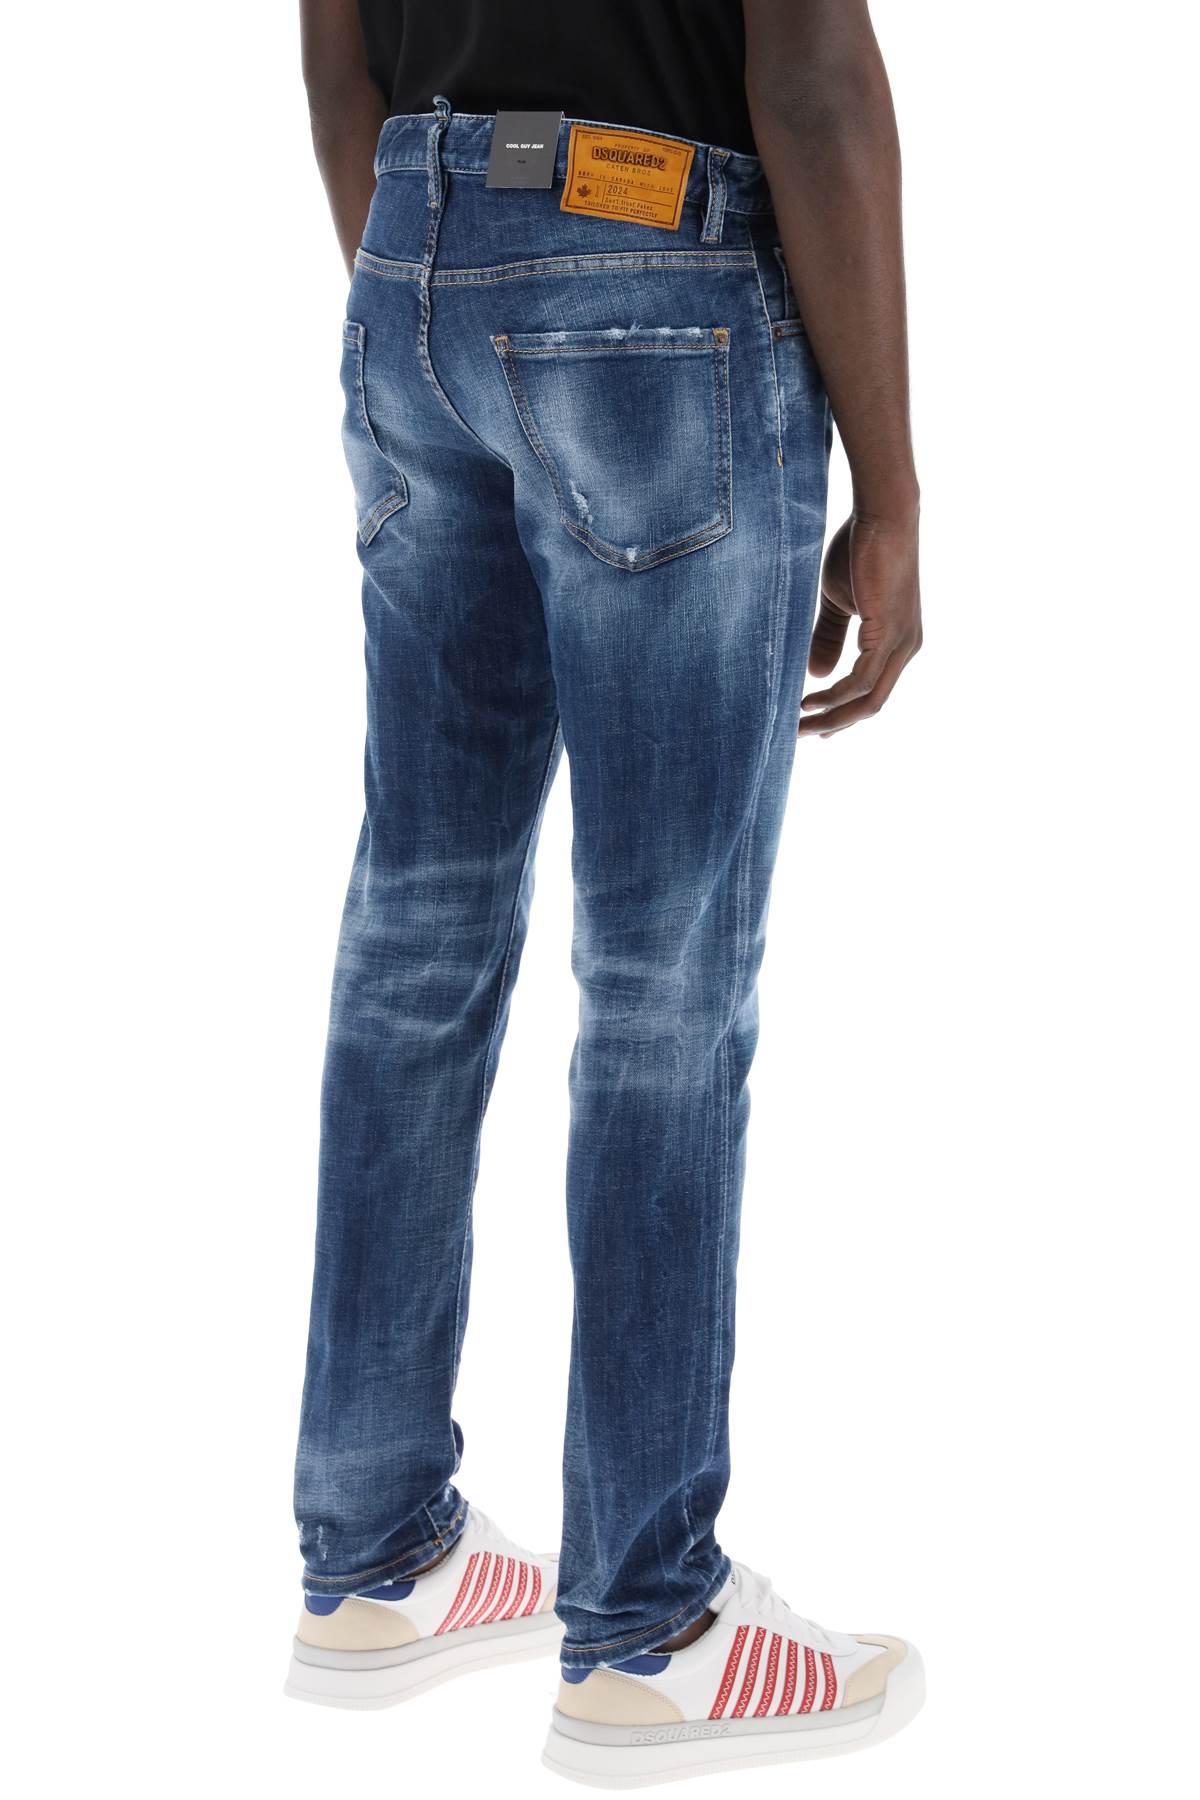 Dsquared2 jeans cool guy in dark 70's wash-2